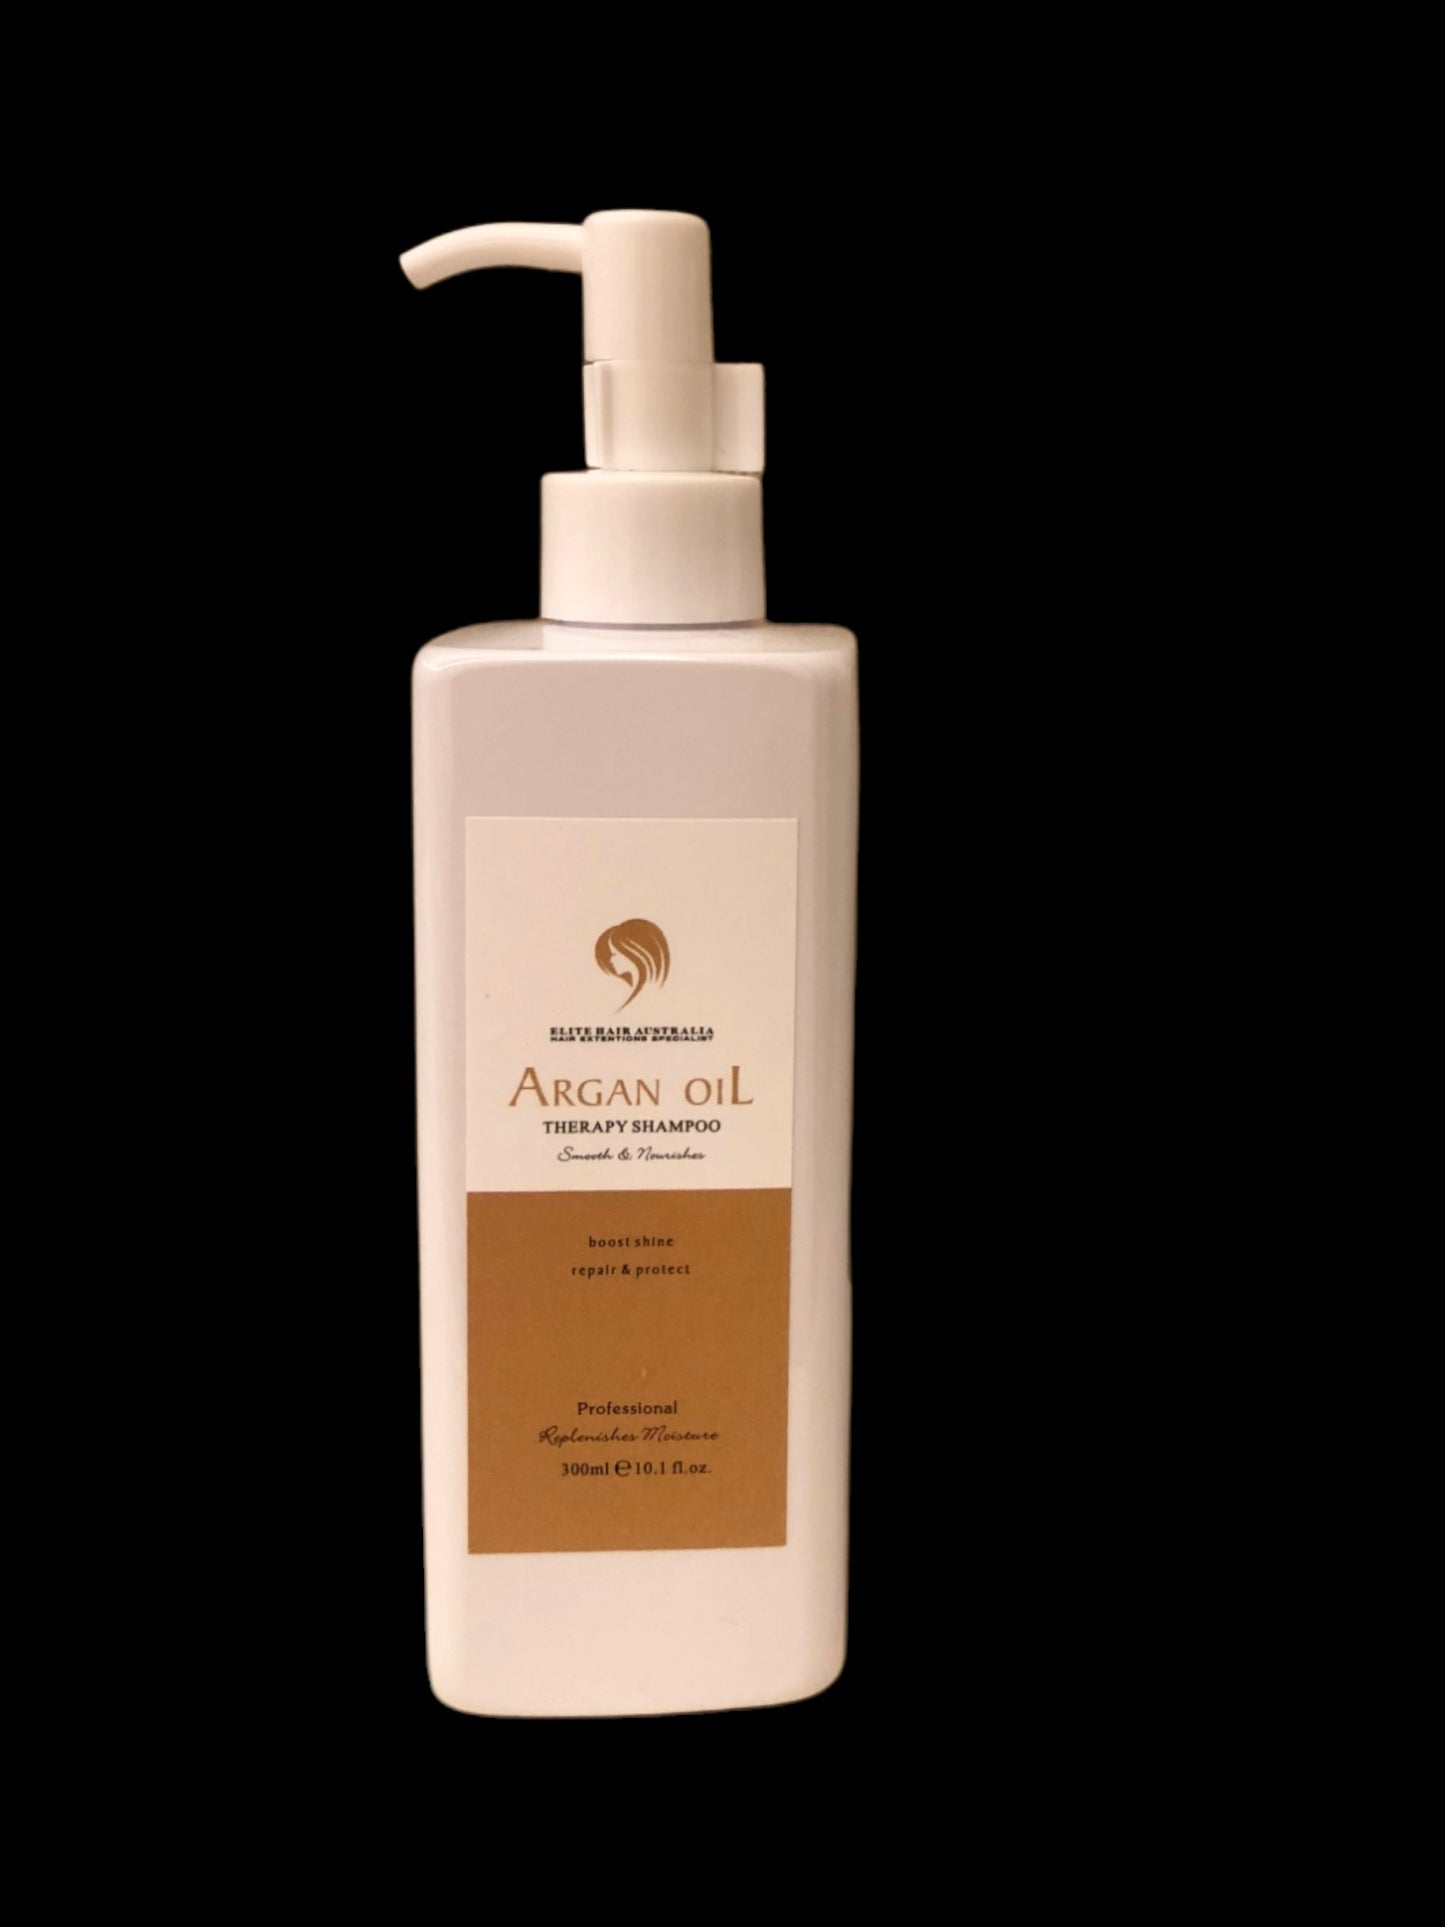 DELUXE PACKAGE! ARGAN OIL THERAPY SHAMPOO CONDITIONER MASK